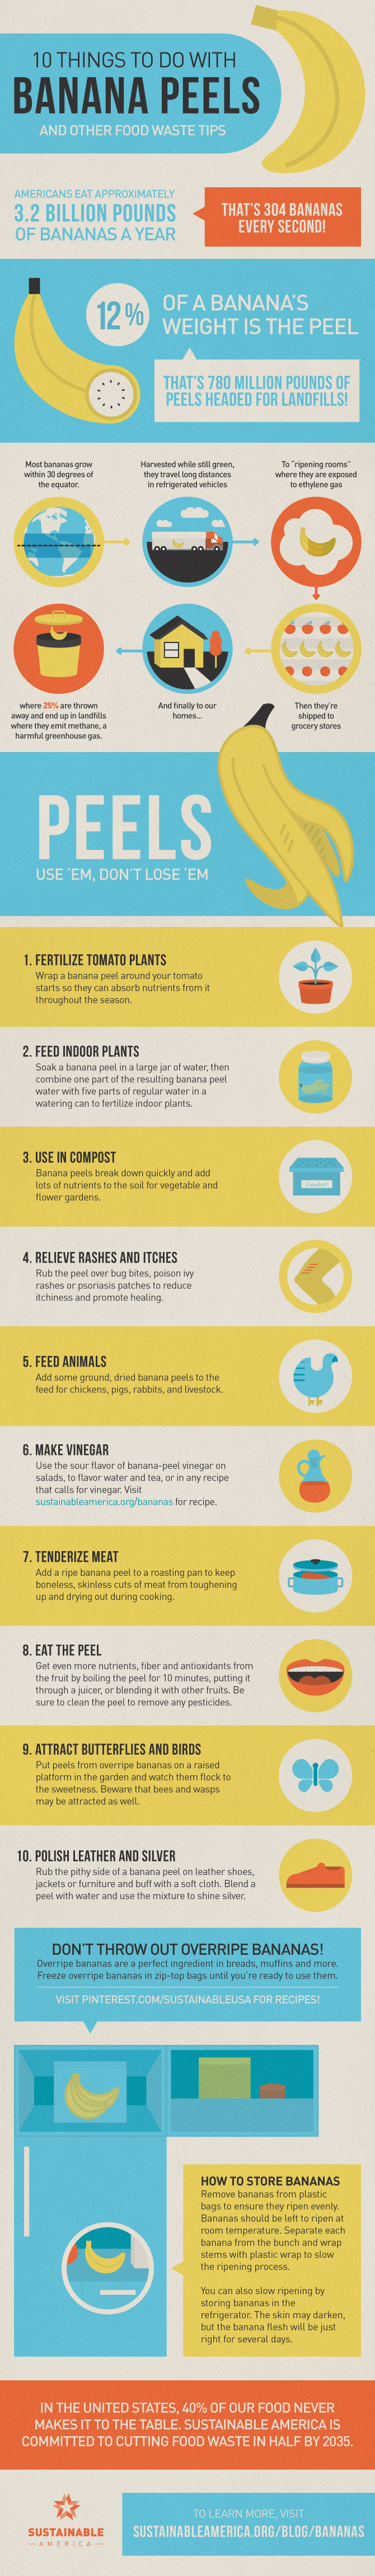 10 Cool Things You Can Do With Banana Peels Infographic